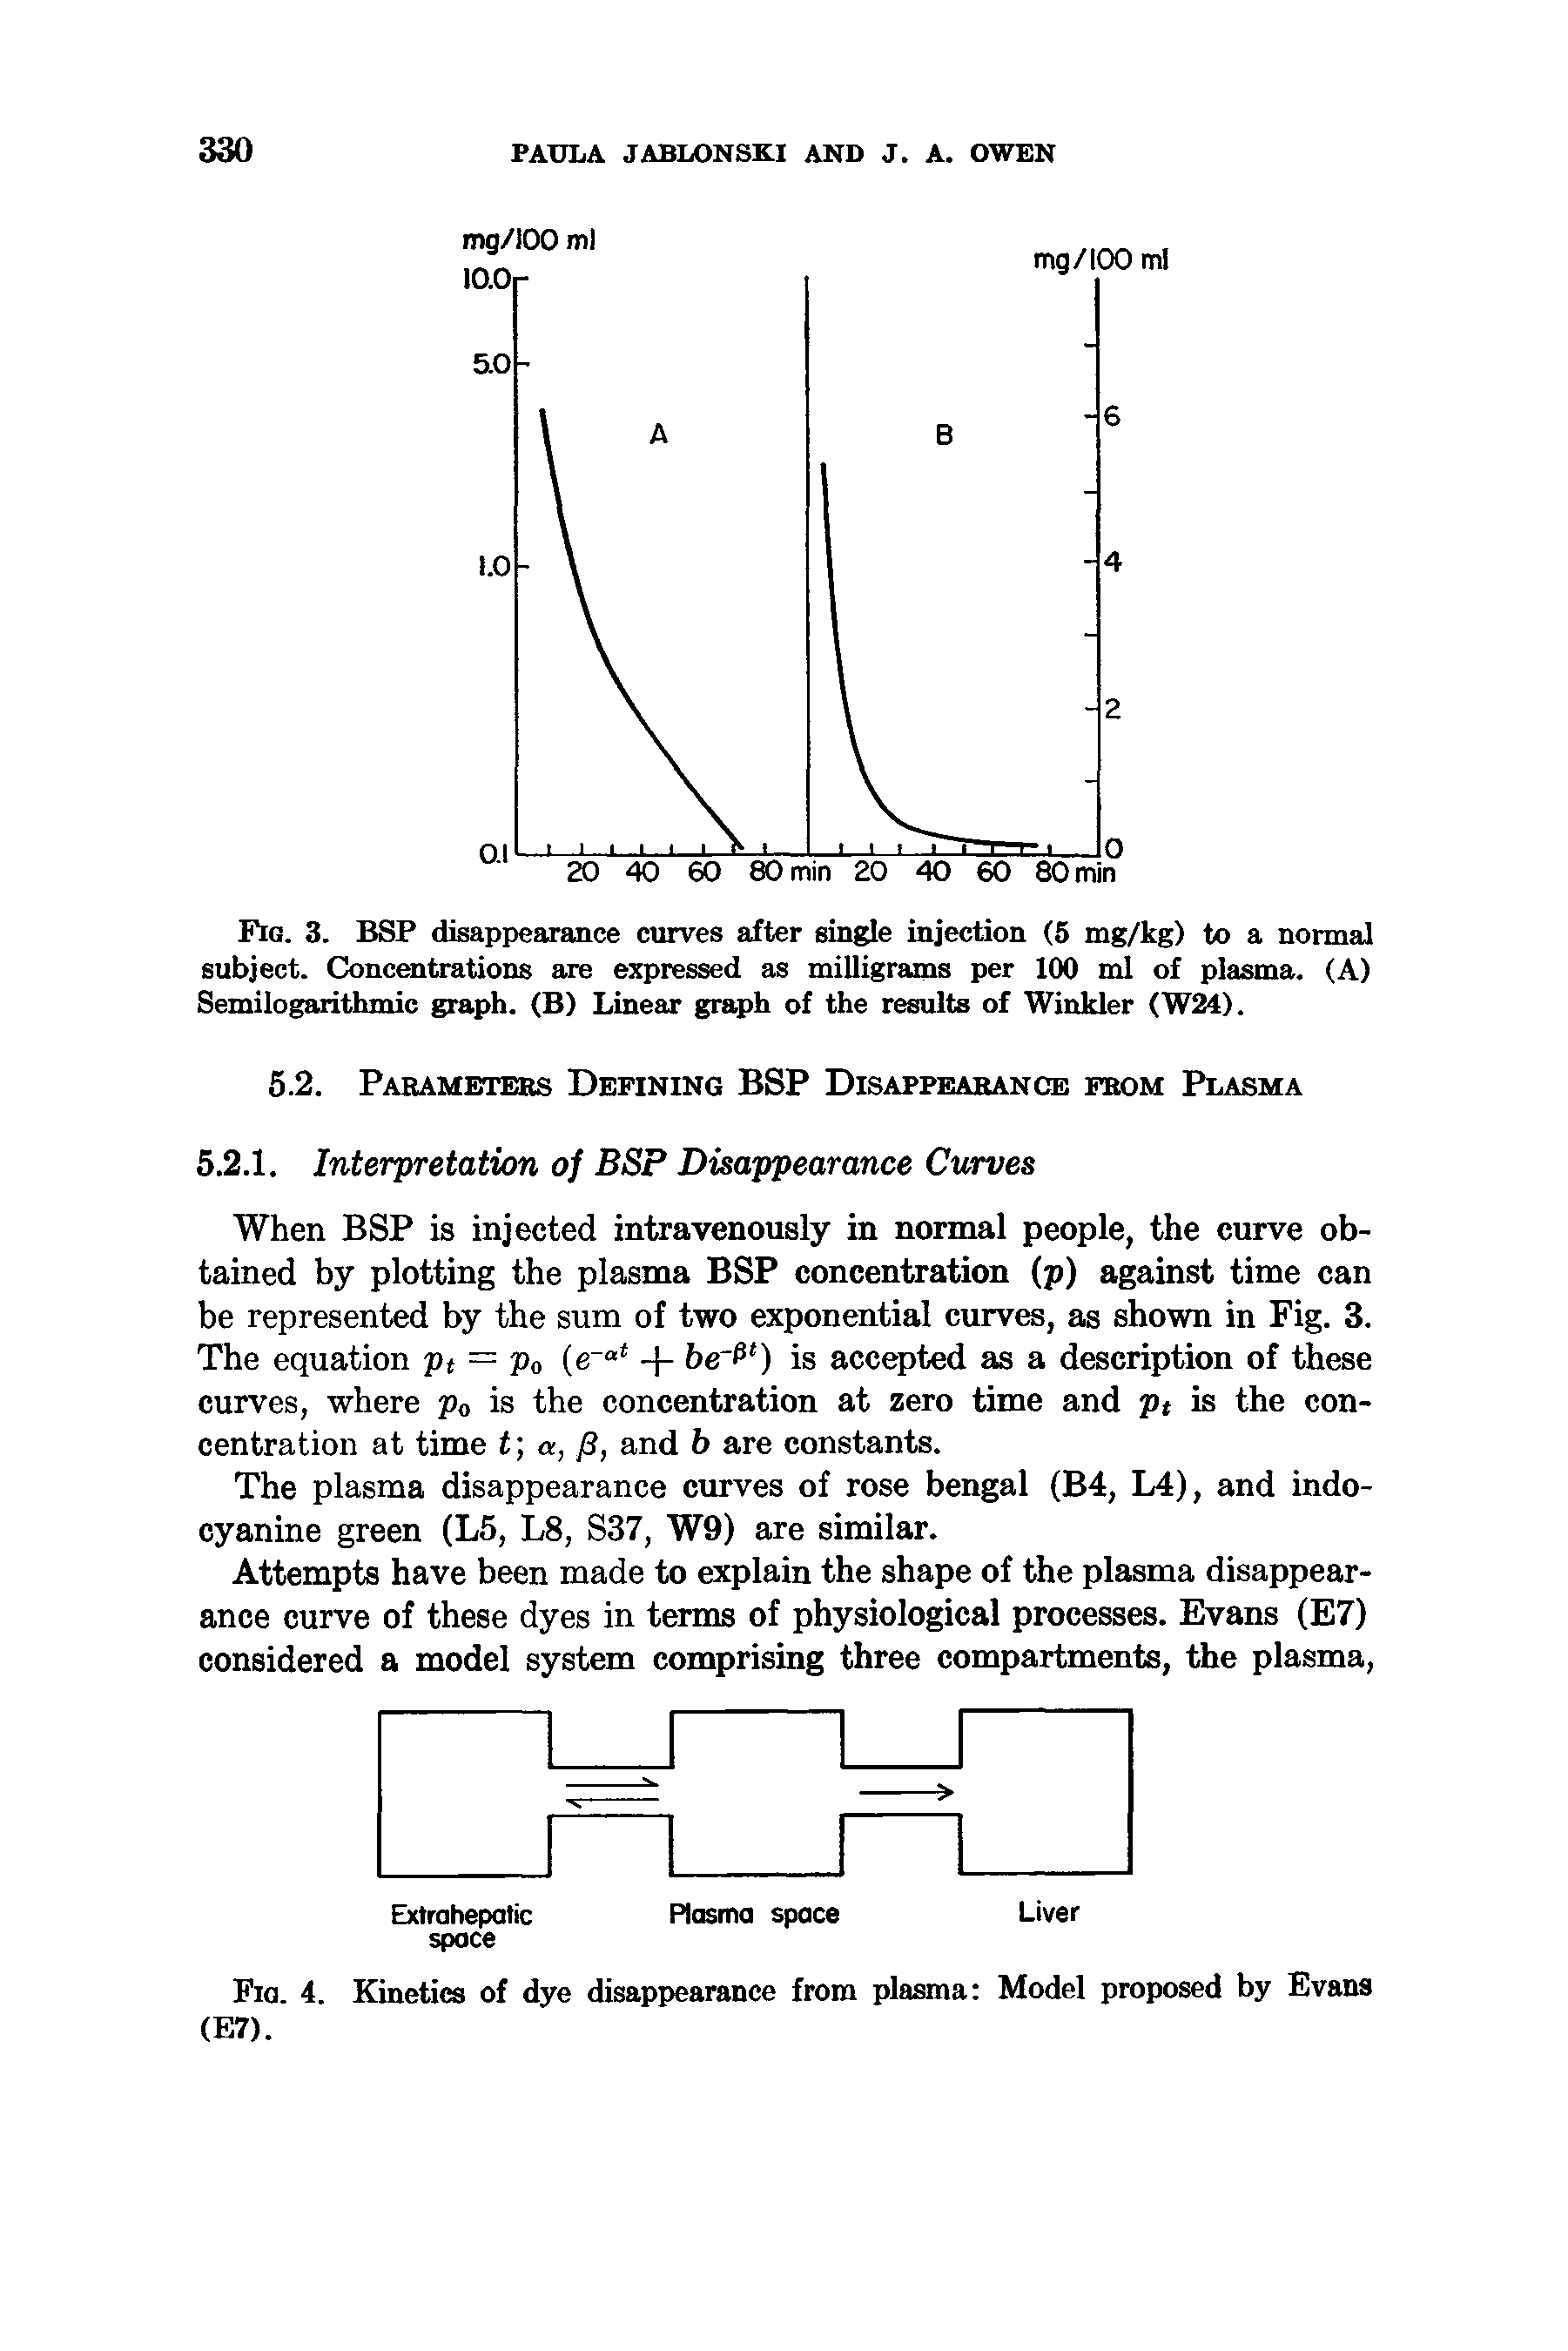 Fig. 3. BSP disappearance curves after single injection (5 mg/kg) to a normal subject. Concentrations are expressed as milligrams per 100 ml of plasma. (A) Semilogarithmic graph. (B) Linear graph of the results of Winkler (W24).